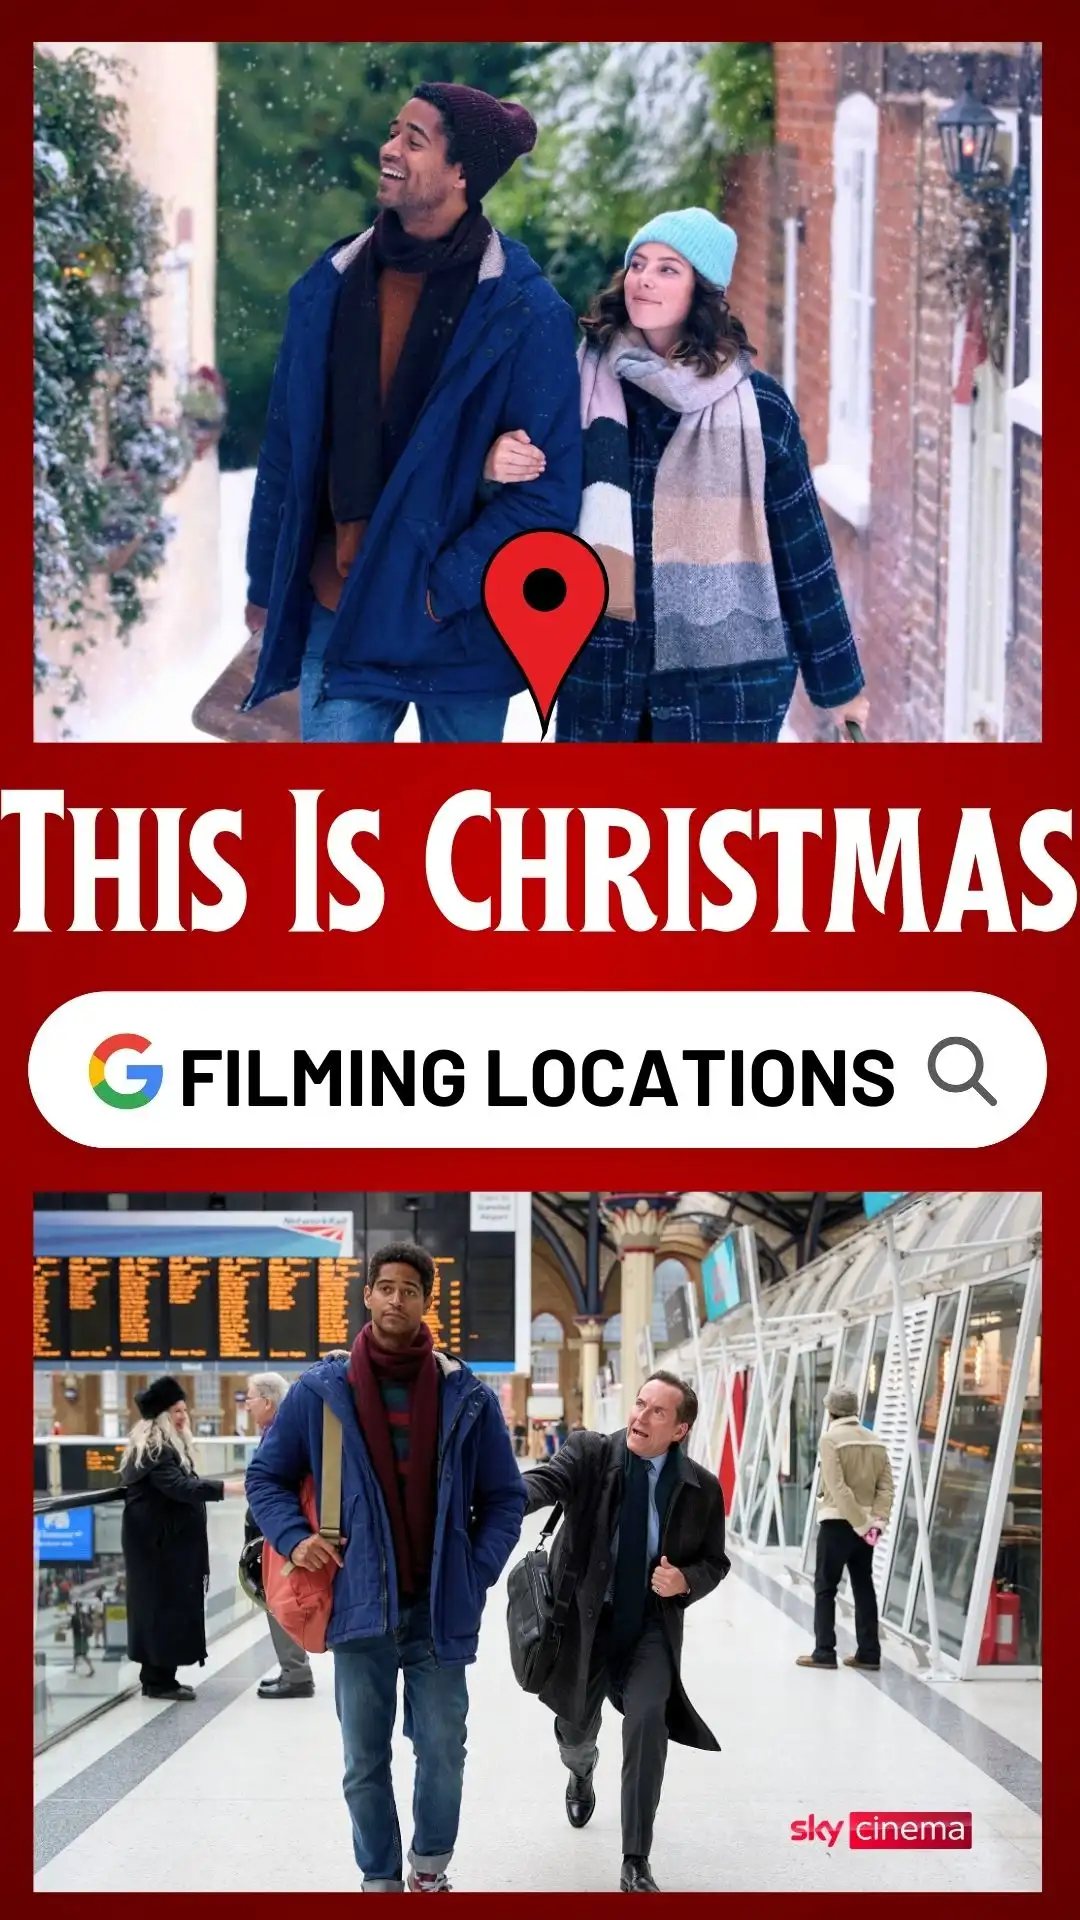 This Is Christmas Filming Locations